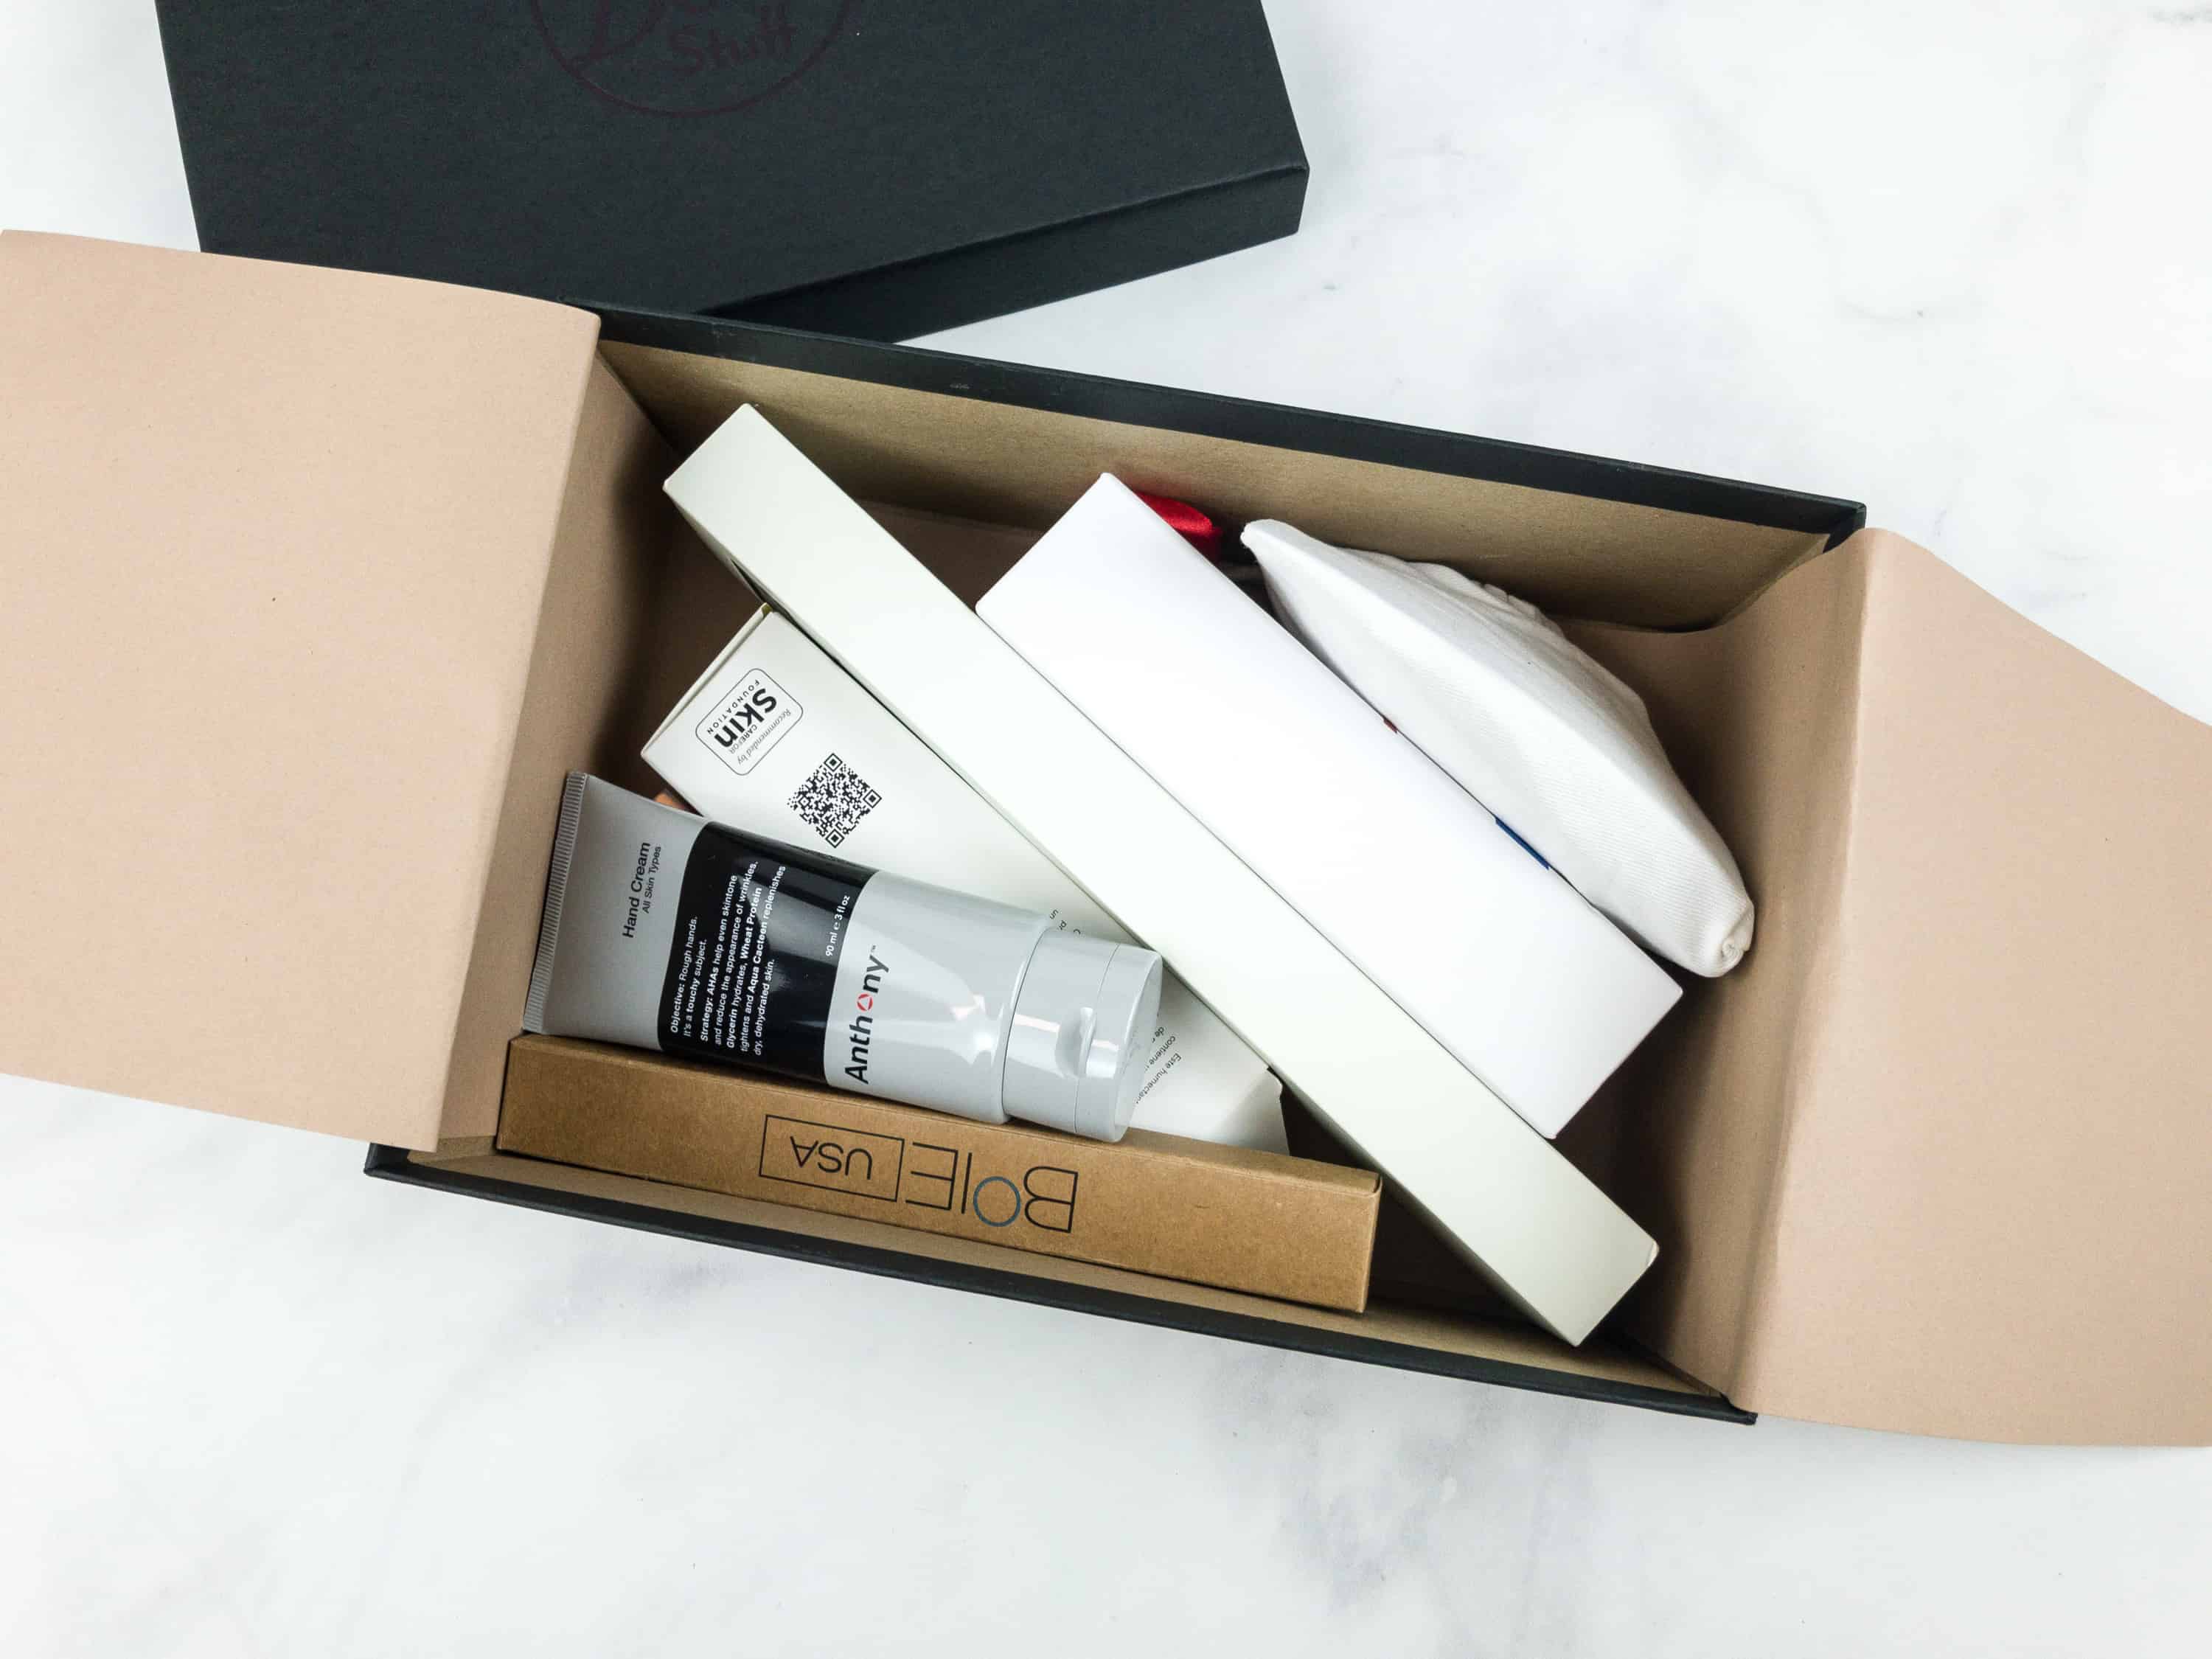 GQ Best Stuff Box Spring 2018 Subscription Box Review Hello Subscription